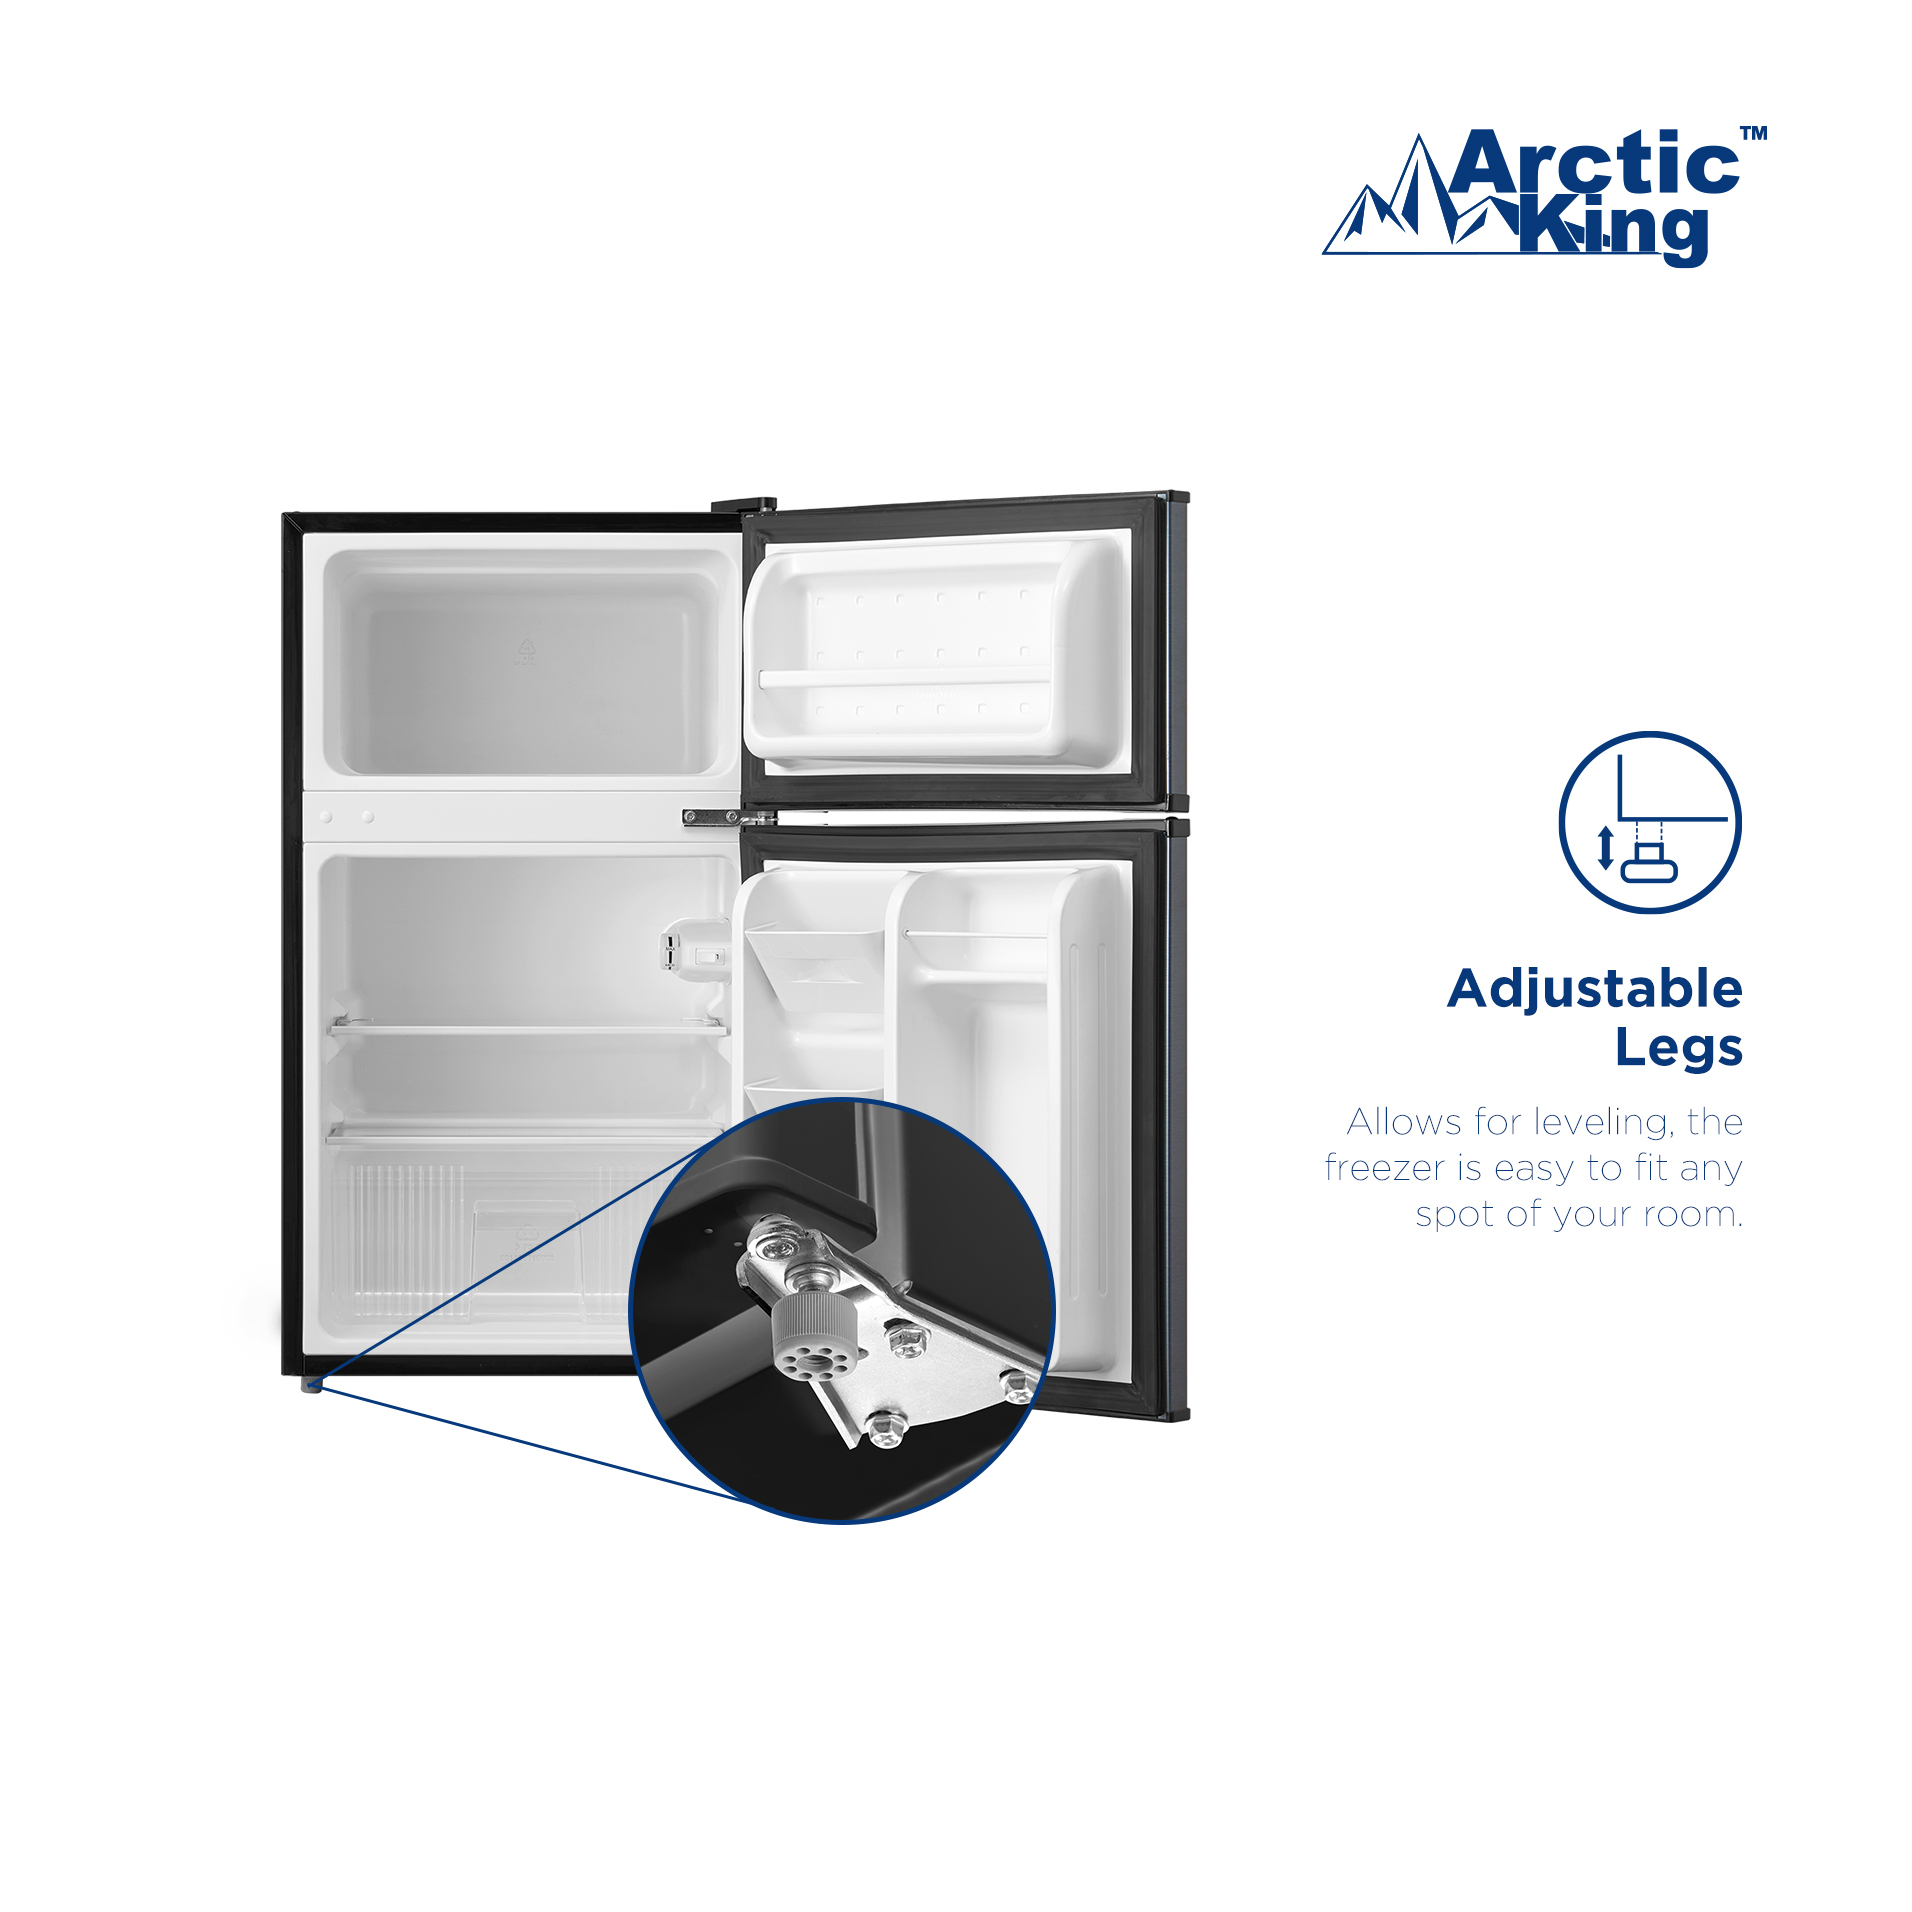 Arctic King 3.2 Cu ft Two Door Mini Fridge with Freezer, Stainless Steel, E-Star, ARM32D5ASL - image 11 of 21